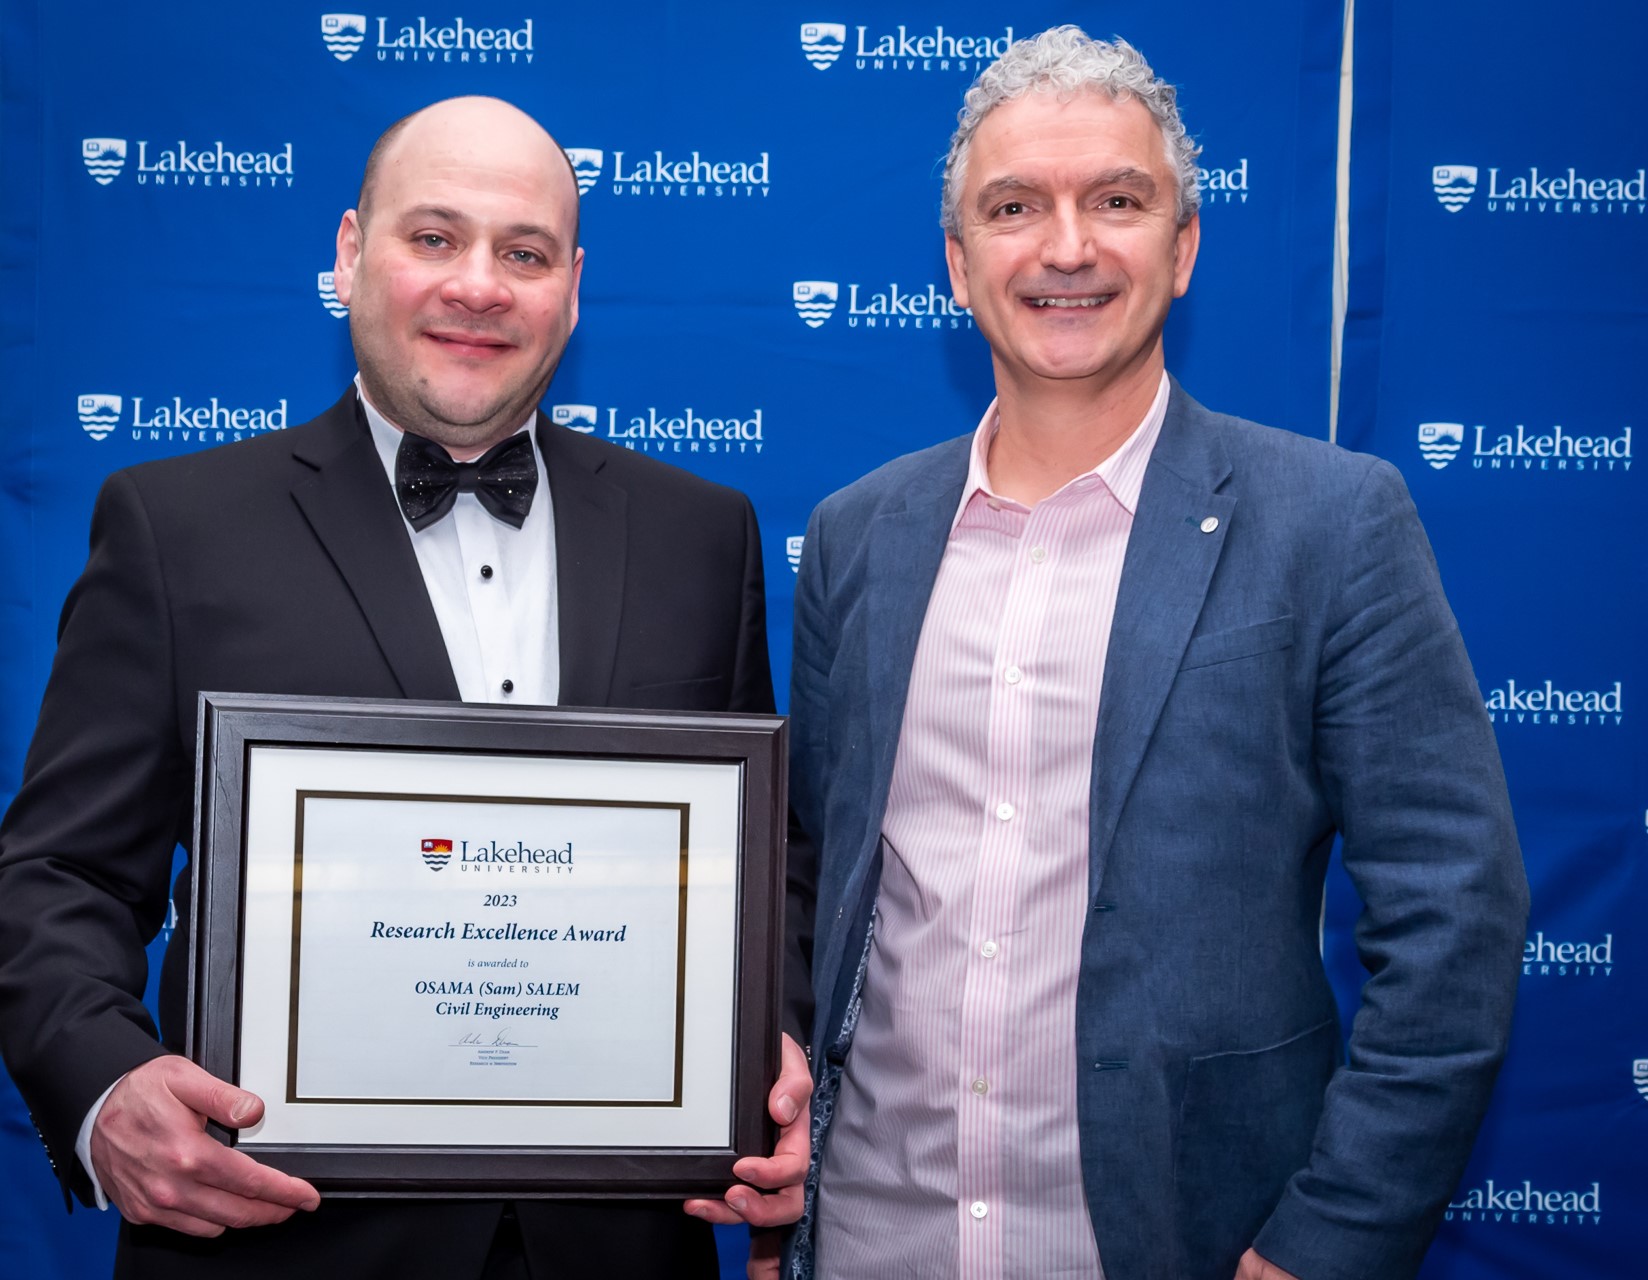 Photo of Research Excellence Award Winner (NSERC category), Dr. Osama (Sam) Salem, Department of Civil Engineering, with Dr. Paolo Sanzo, Chair, Senate Research Committee